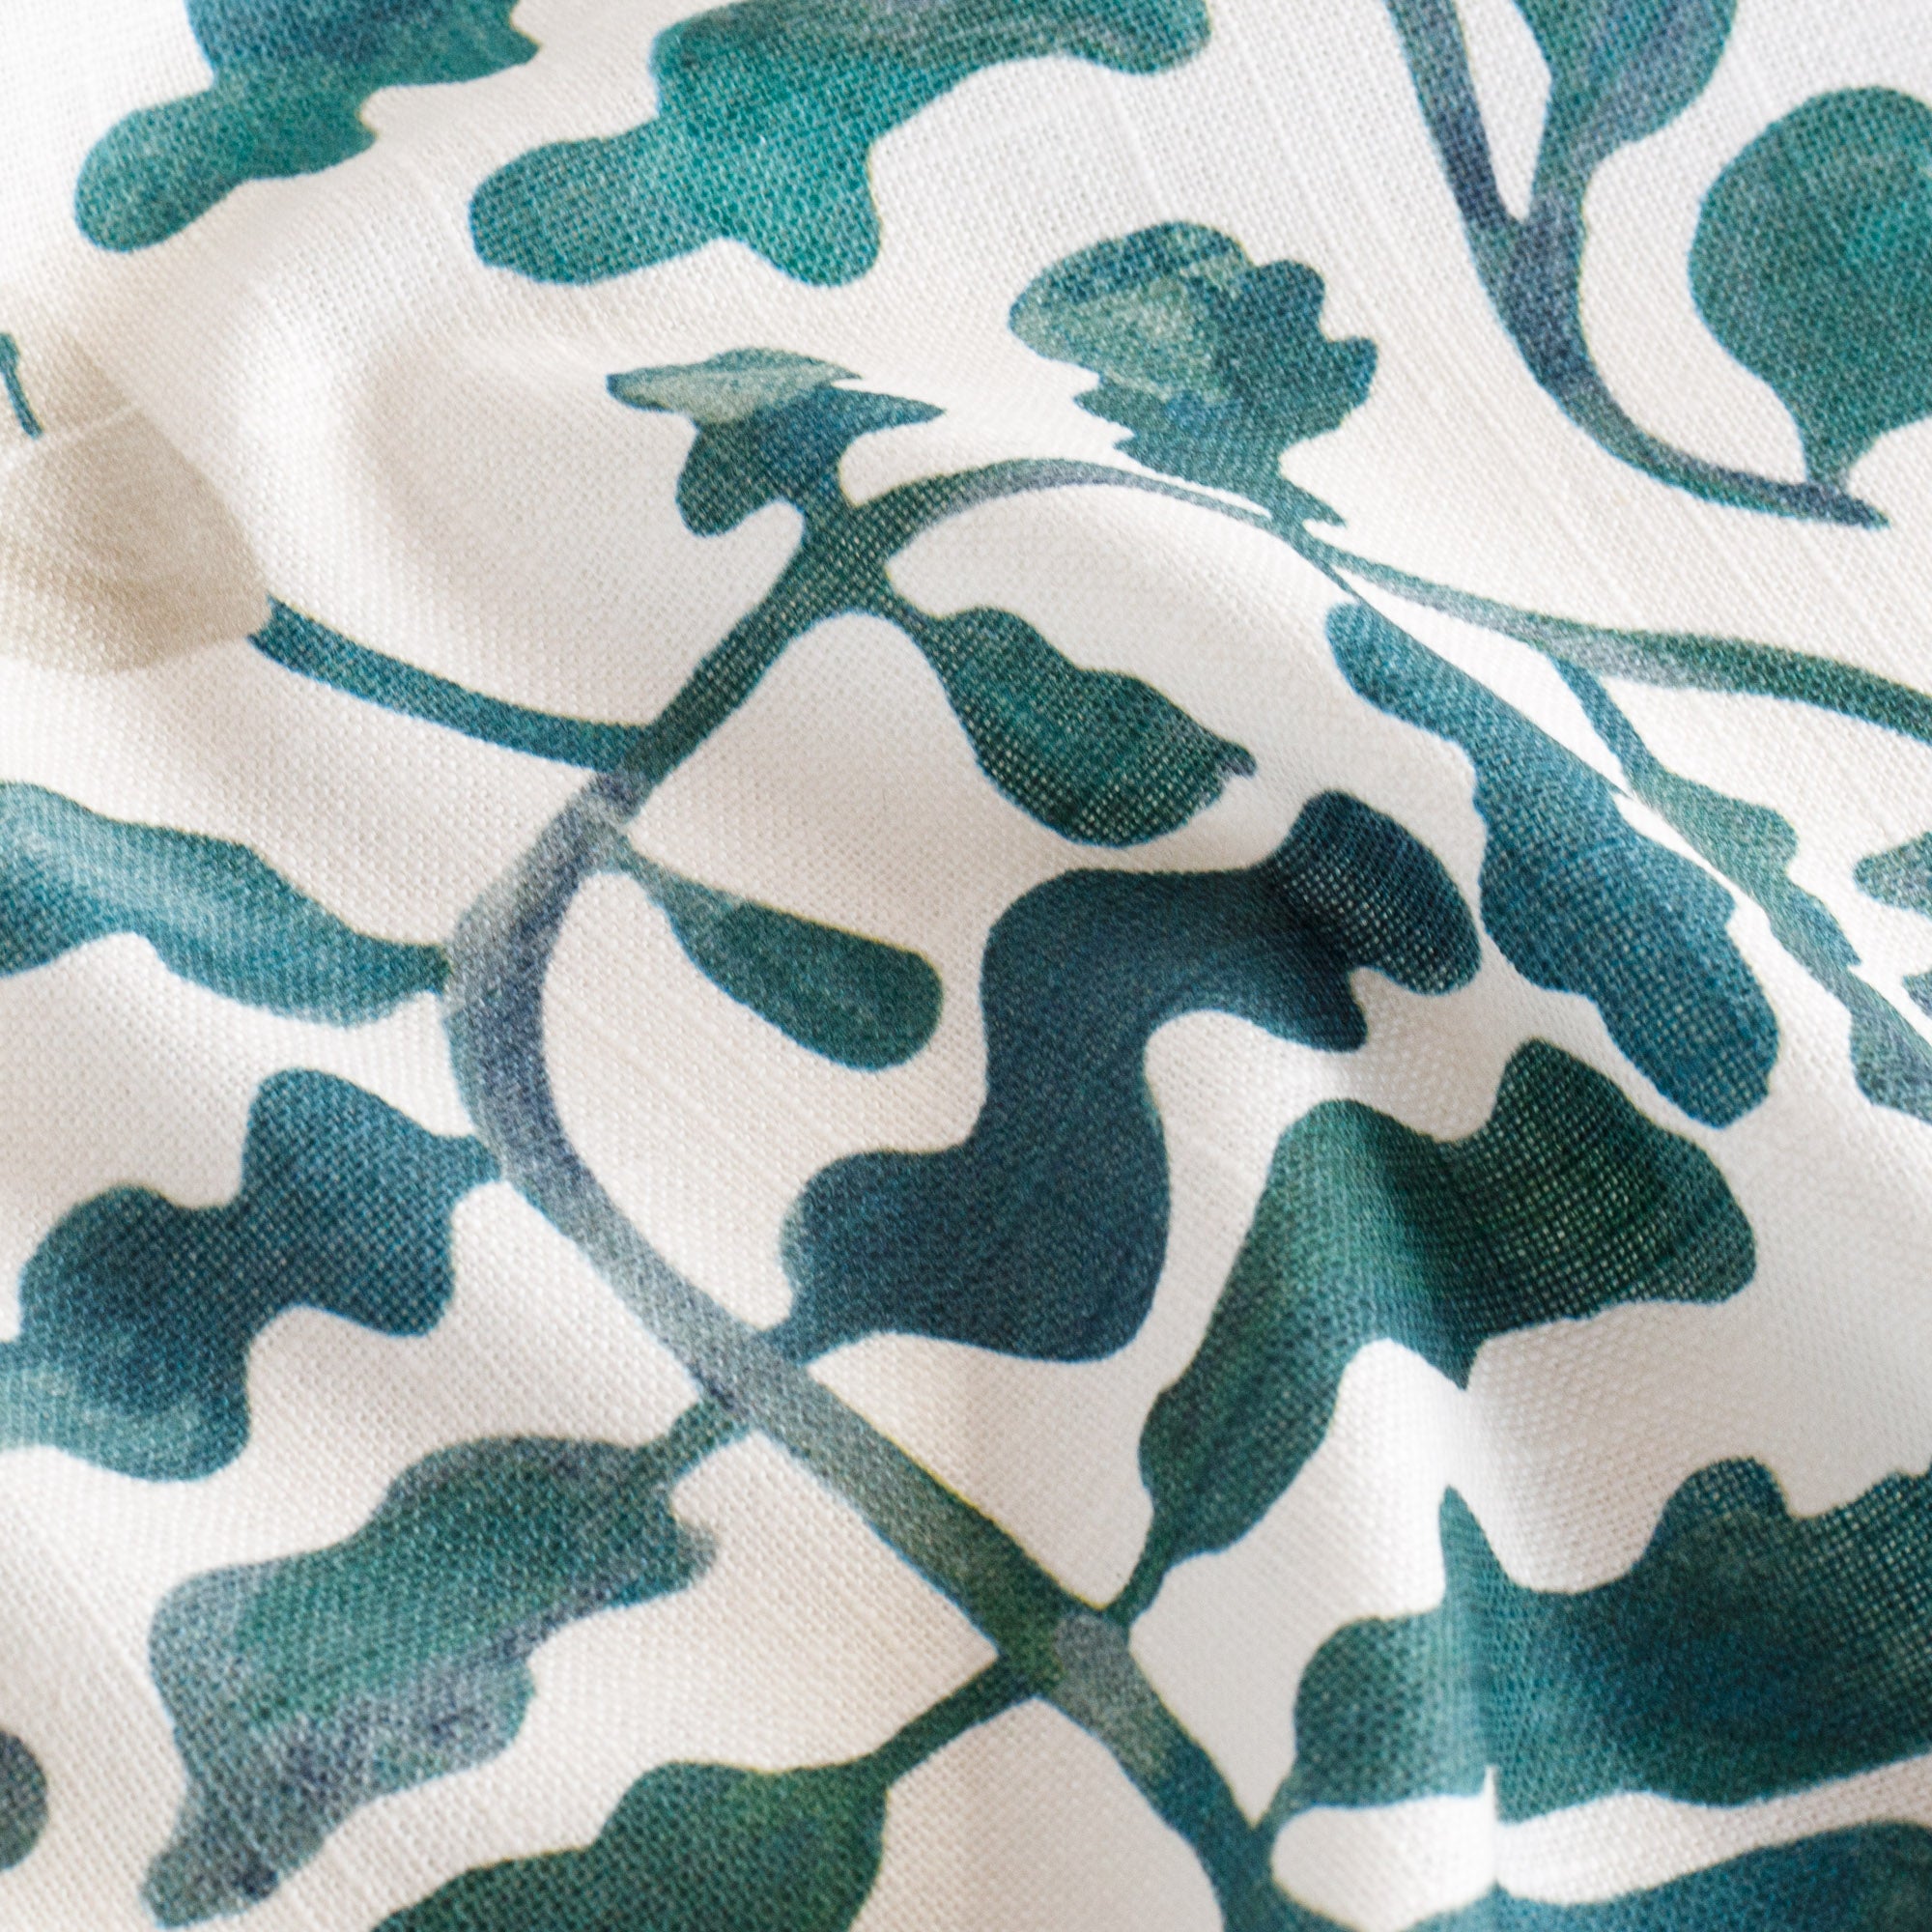 a teal and forest green and white leafy botanical print fabric : close up view